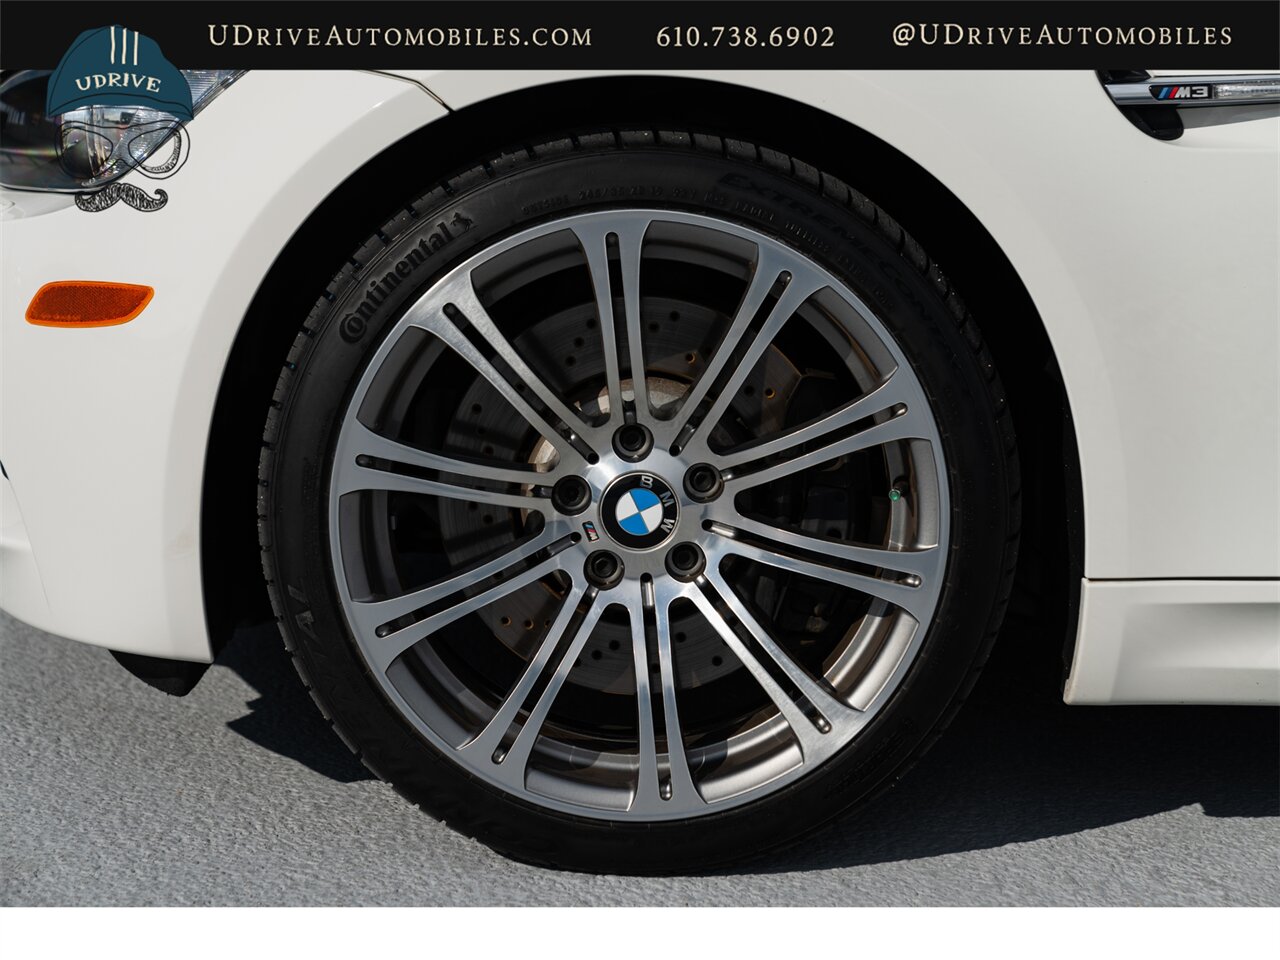 2011 BMW M3  No Nav Carbon Roof Comf Acc 19in Whls 11k Miles - Photo 61 - West Chester, PA 19382